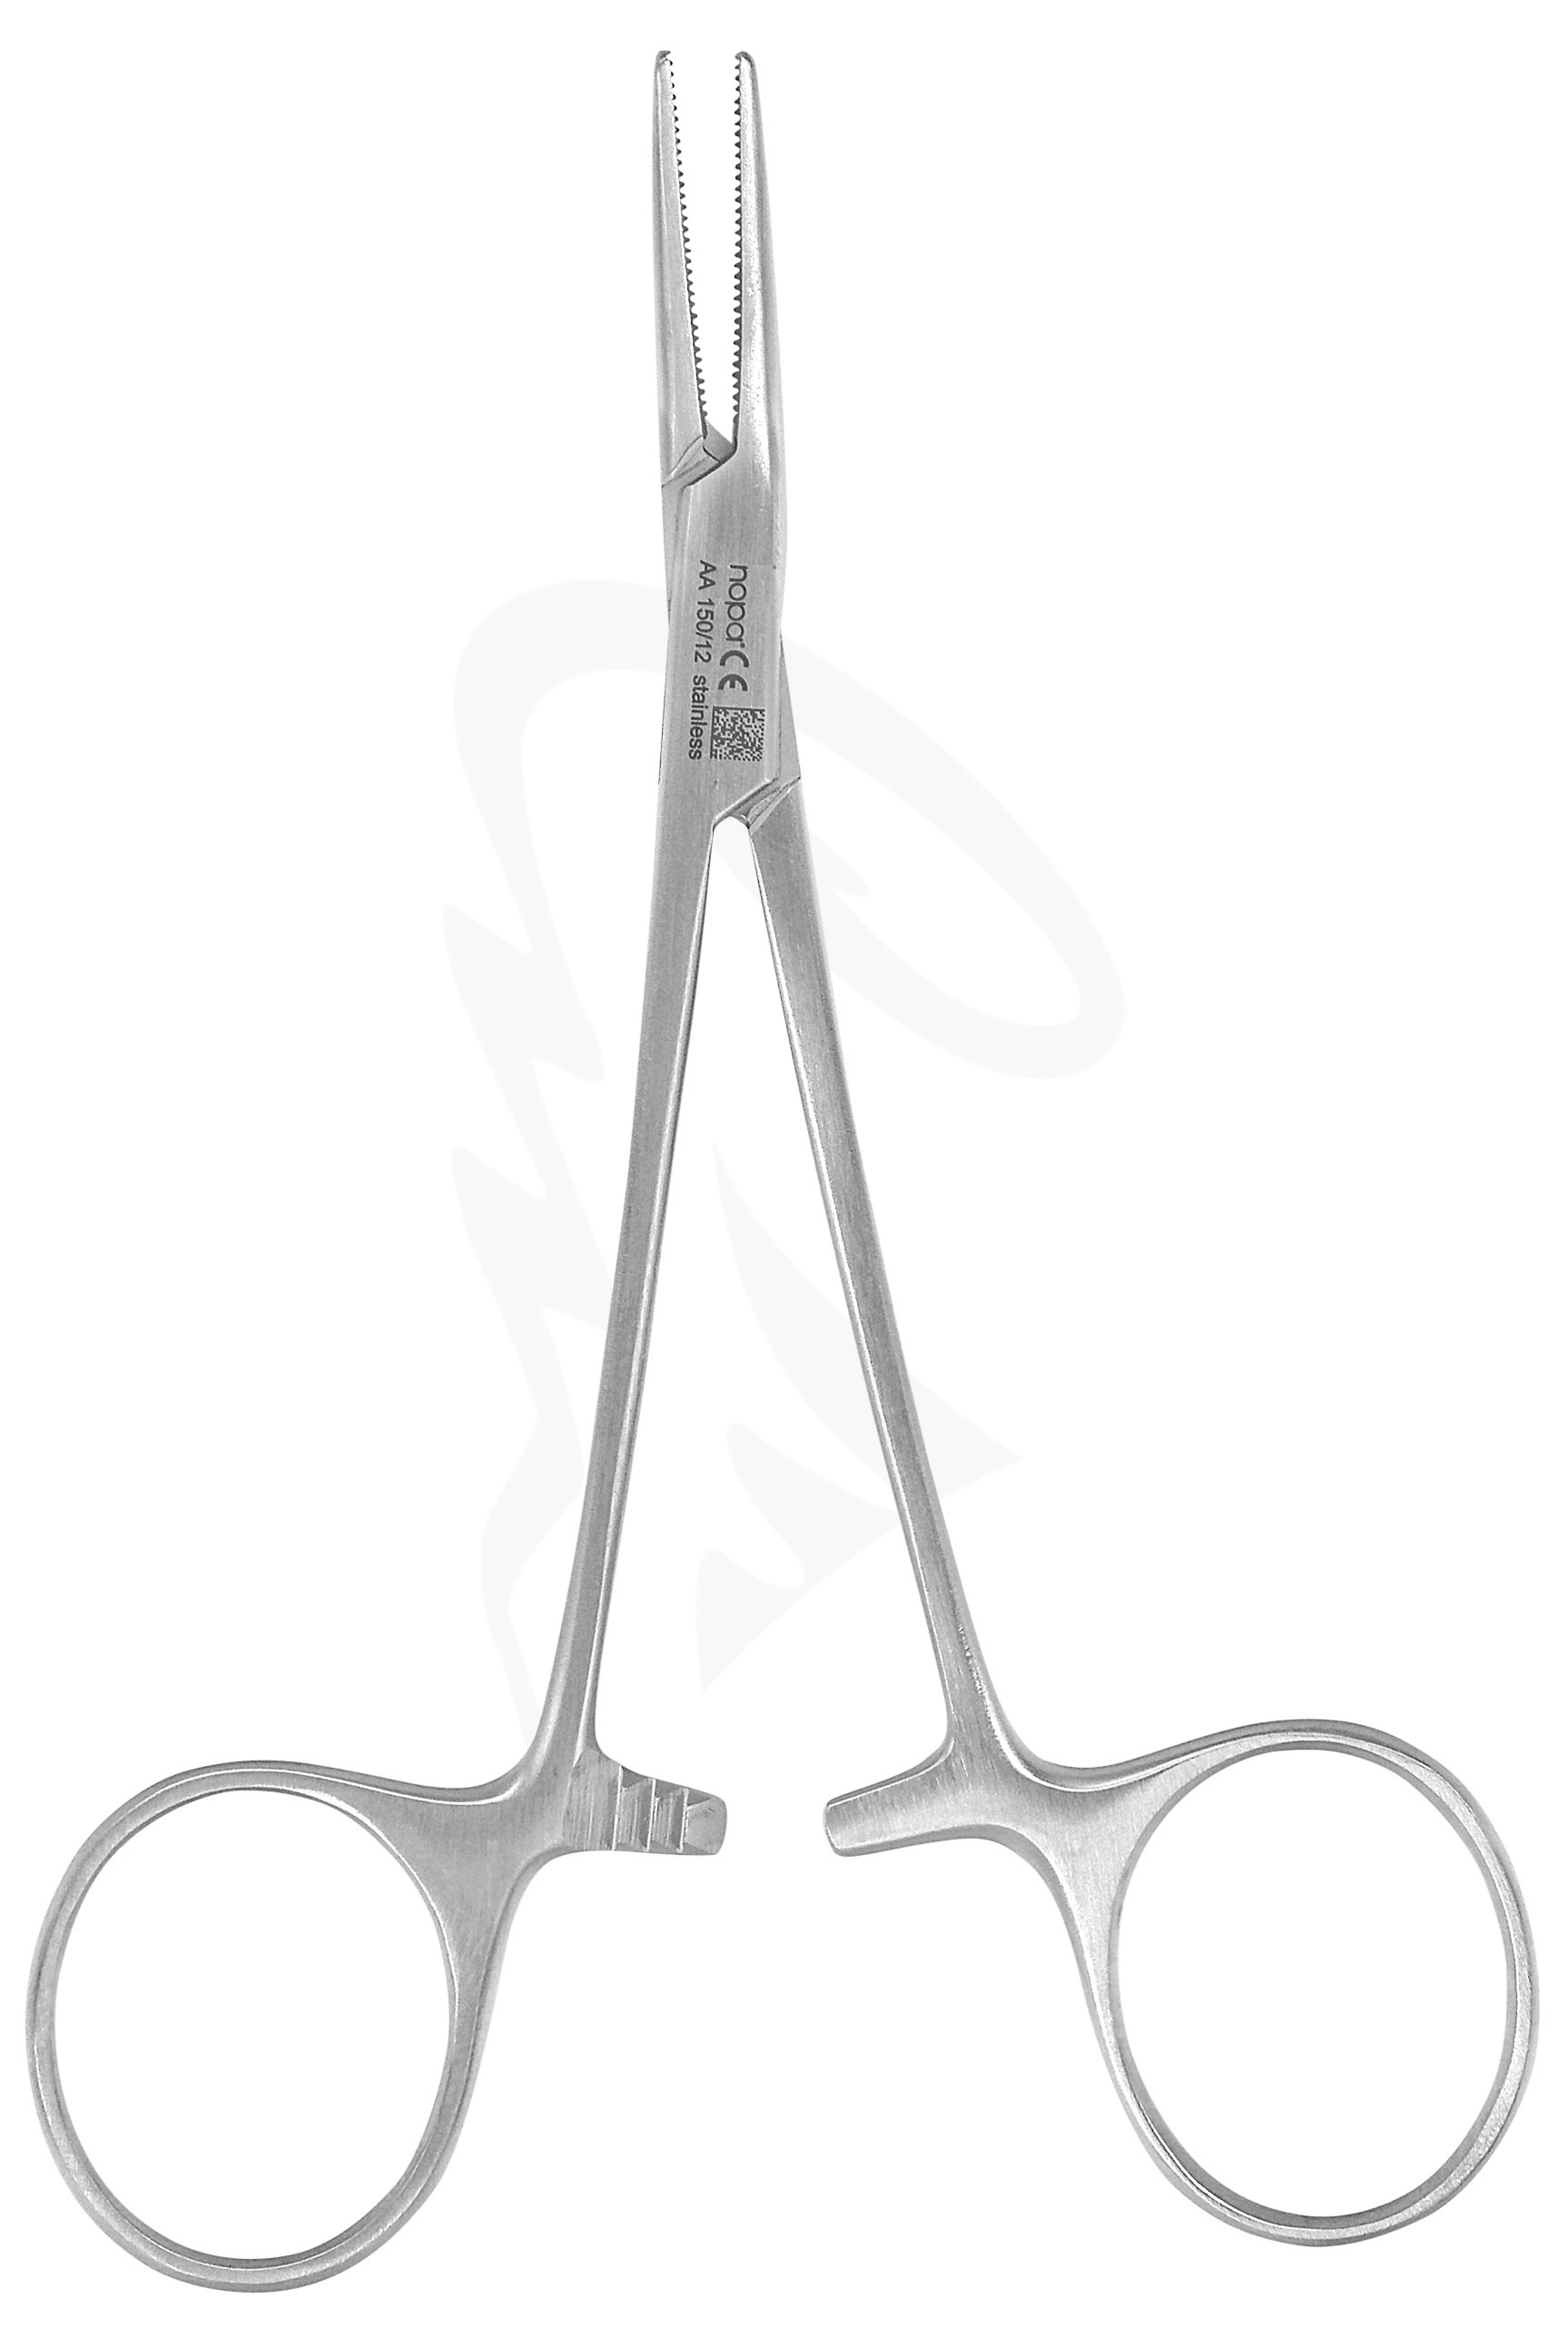 Nopa Halsted-Mosquito Artery Forcep Straight 12.5cm image 0